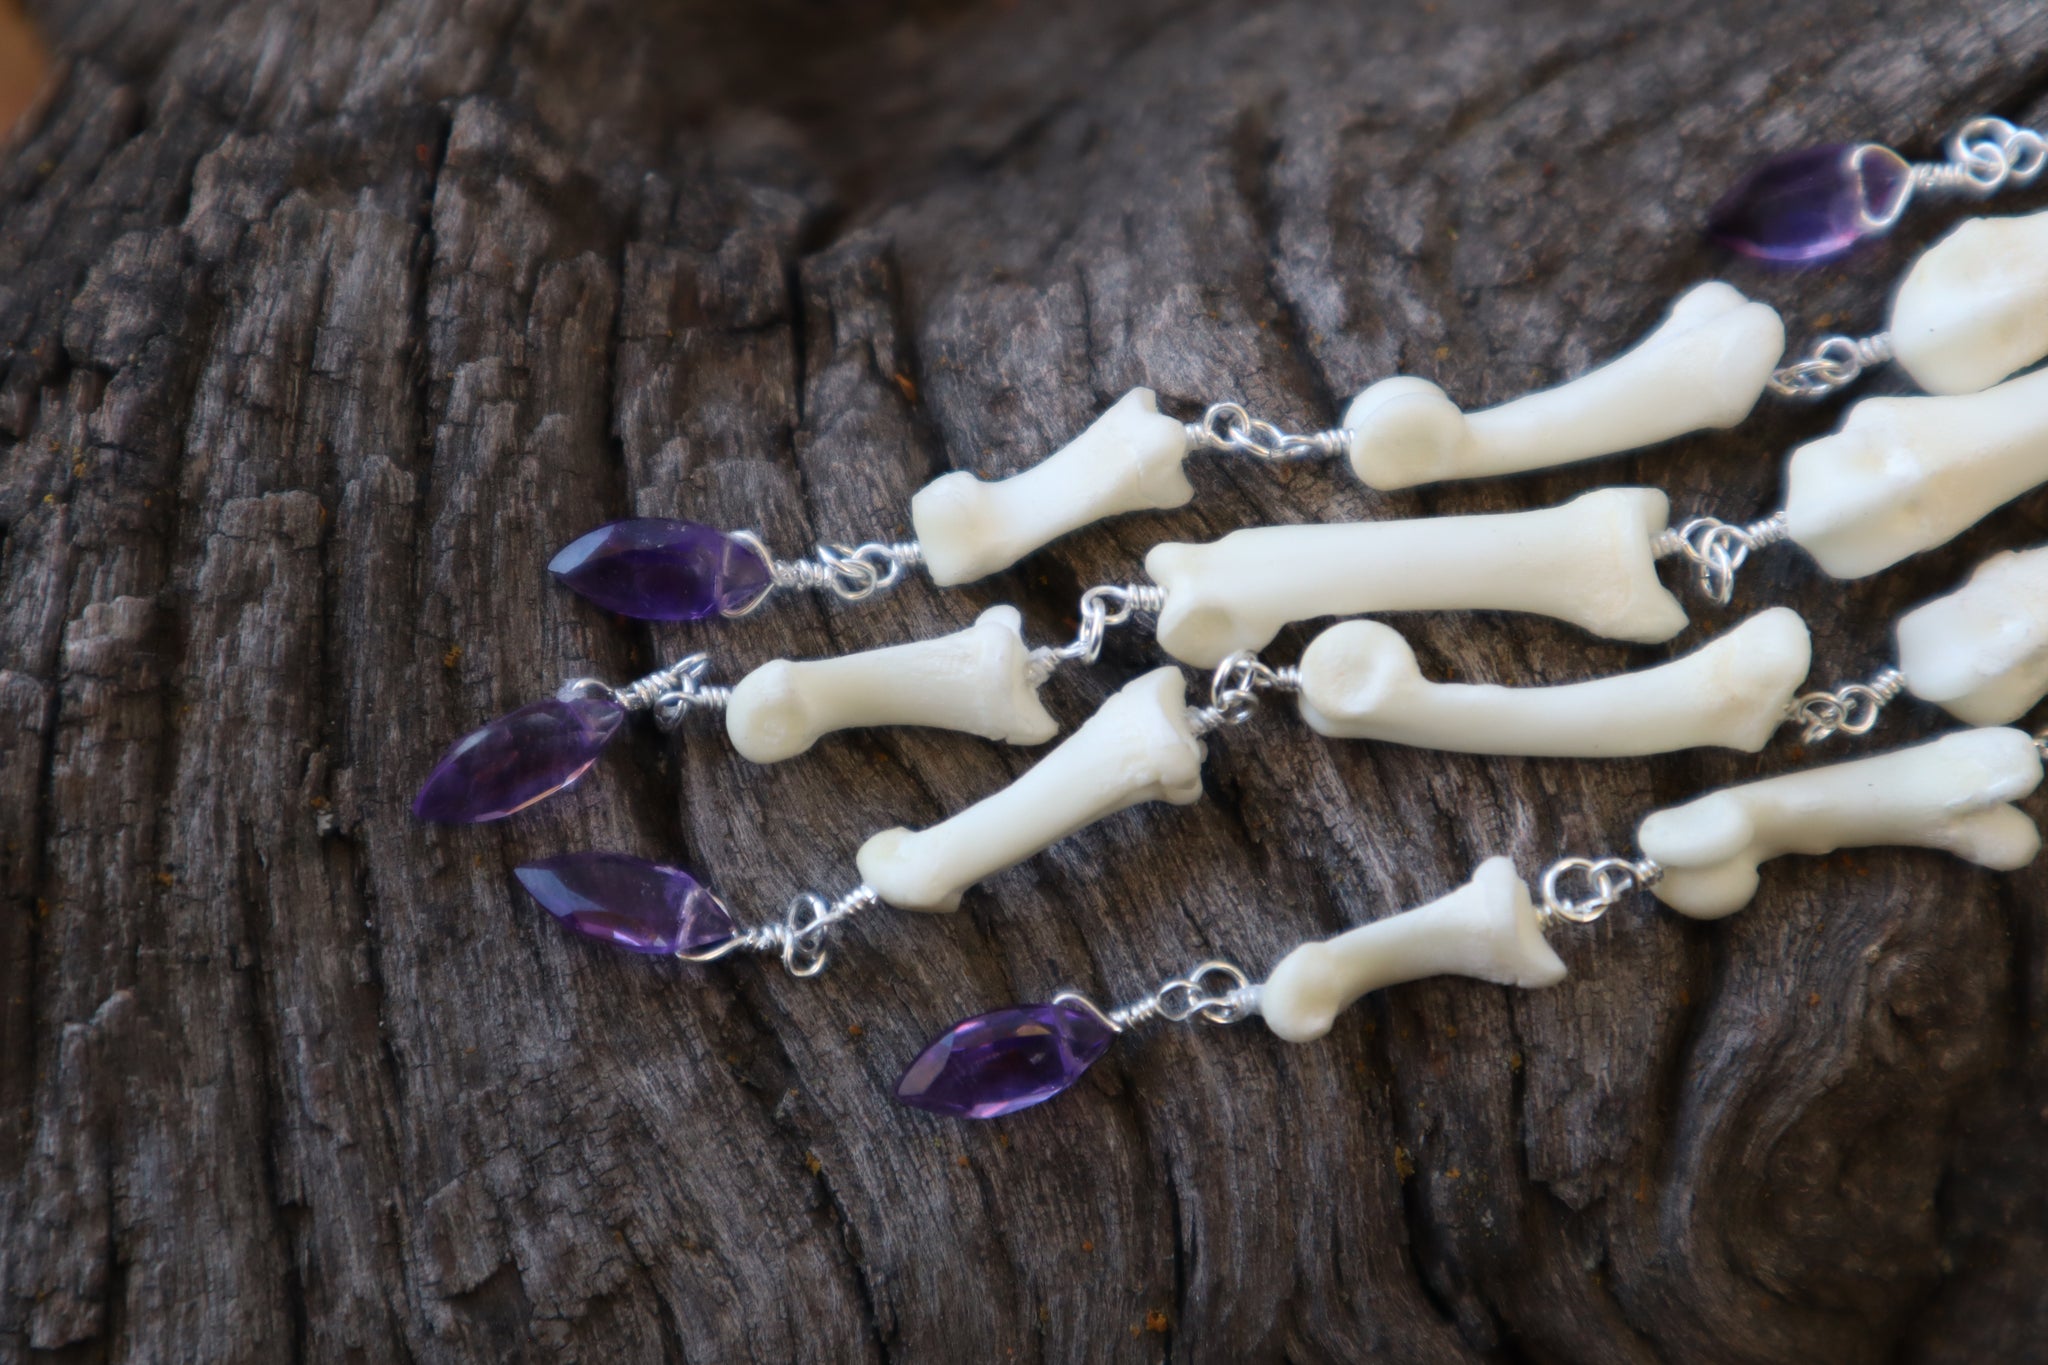 Fluid Bobcat Paw Articulation with Amethyst “Claws”